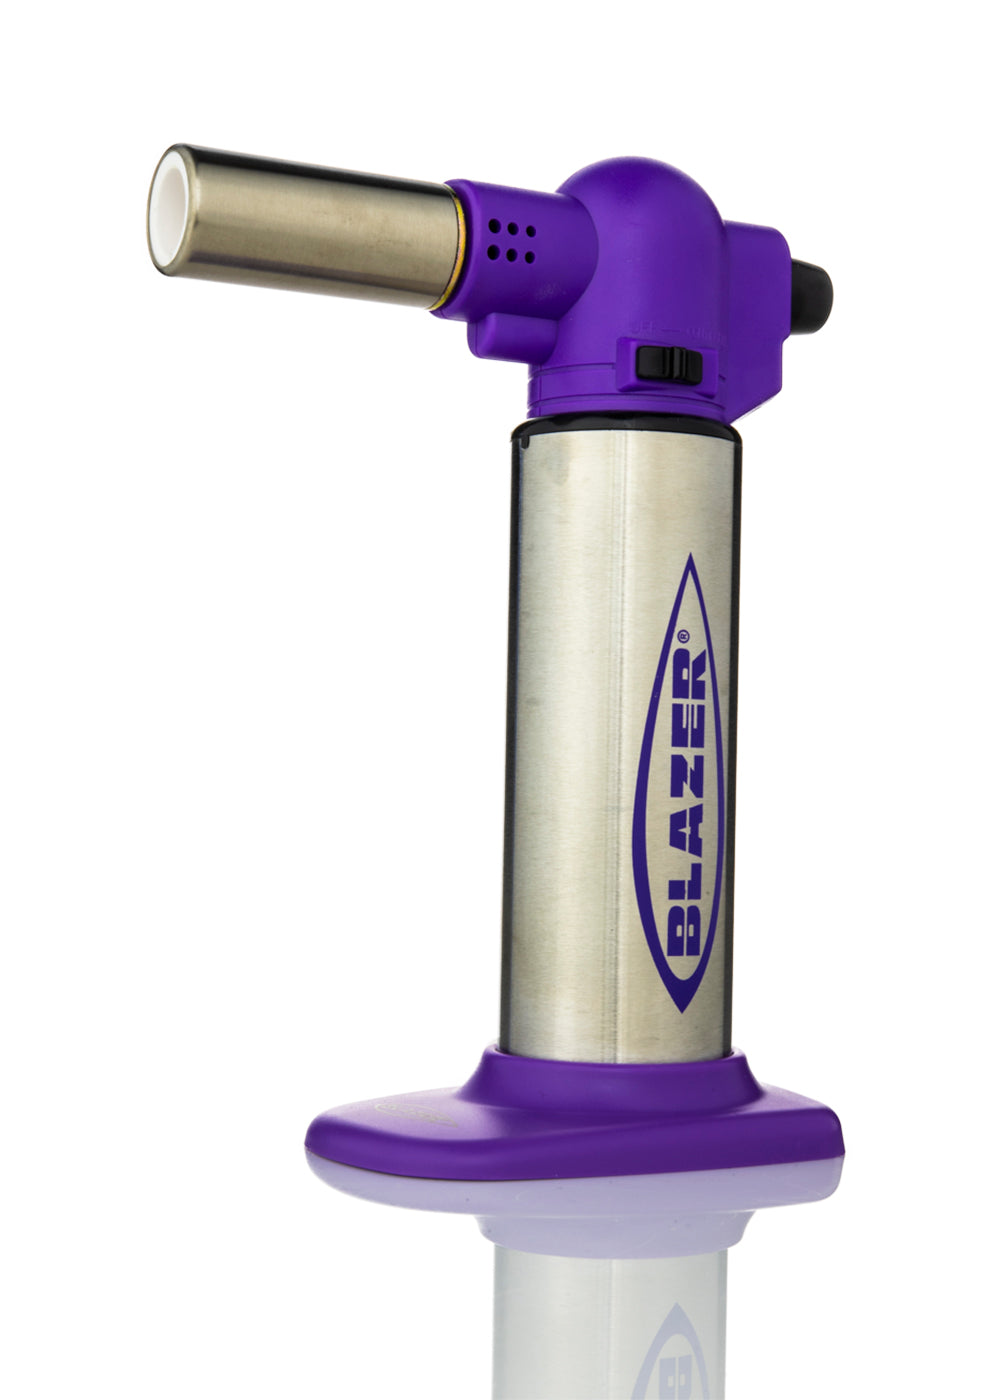 Blazer Big Buddy Turbo Torch in Purple and Stainless Steel